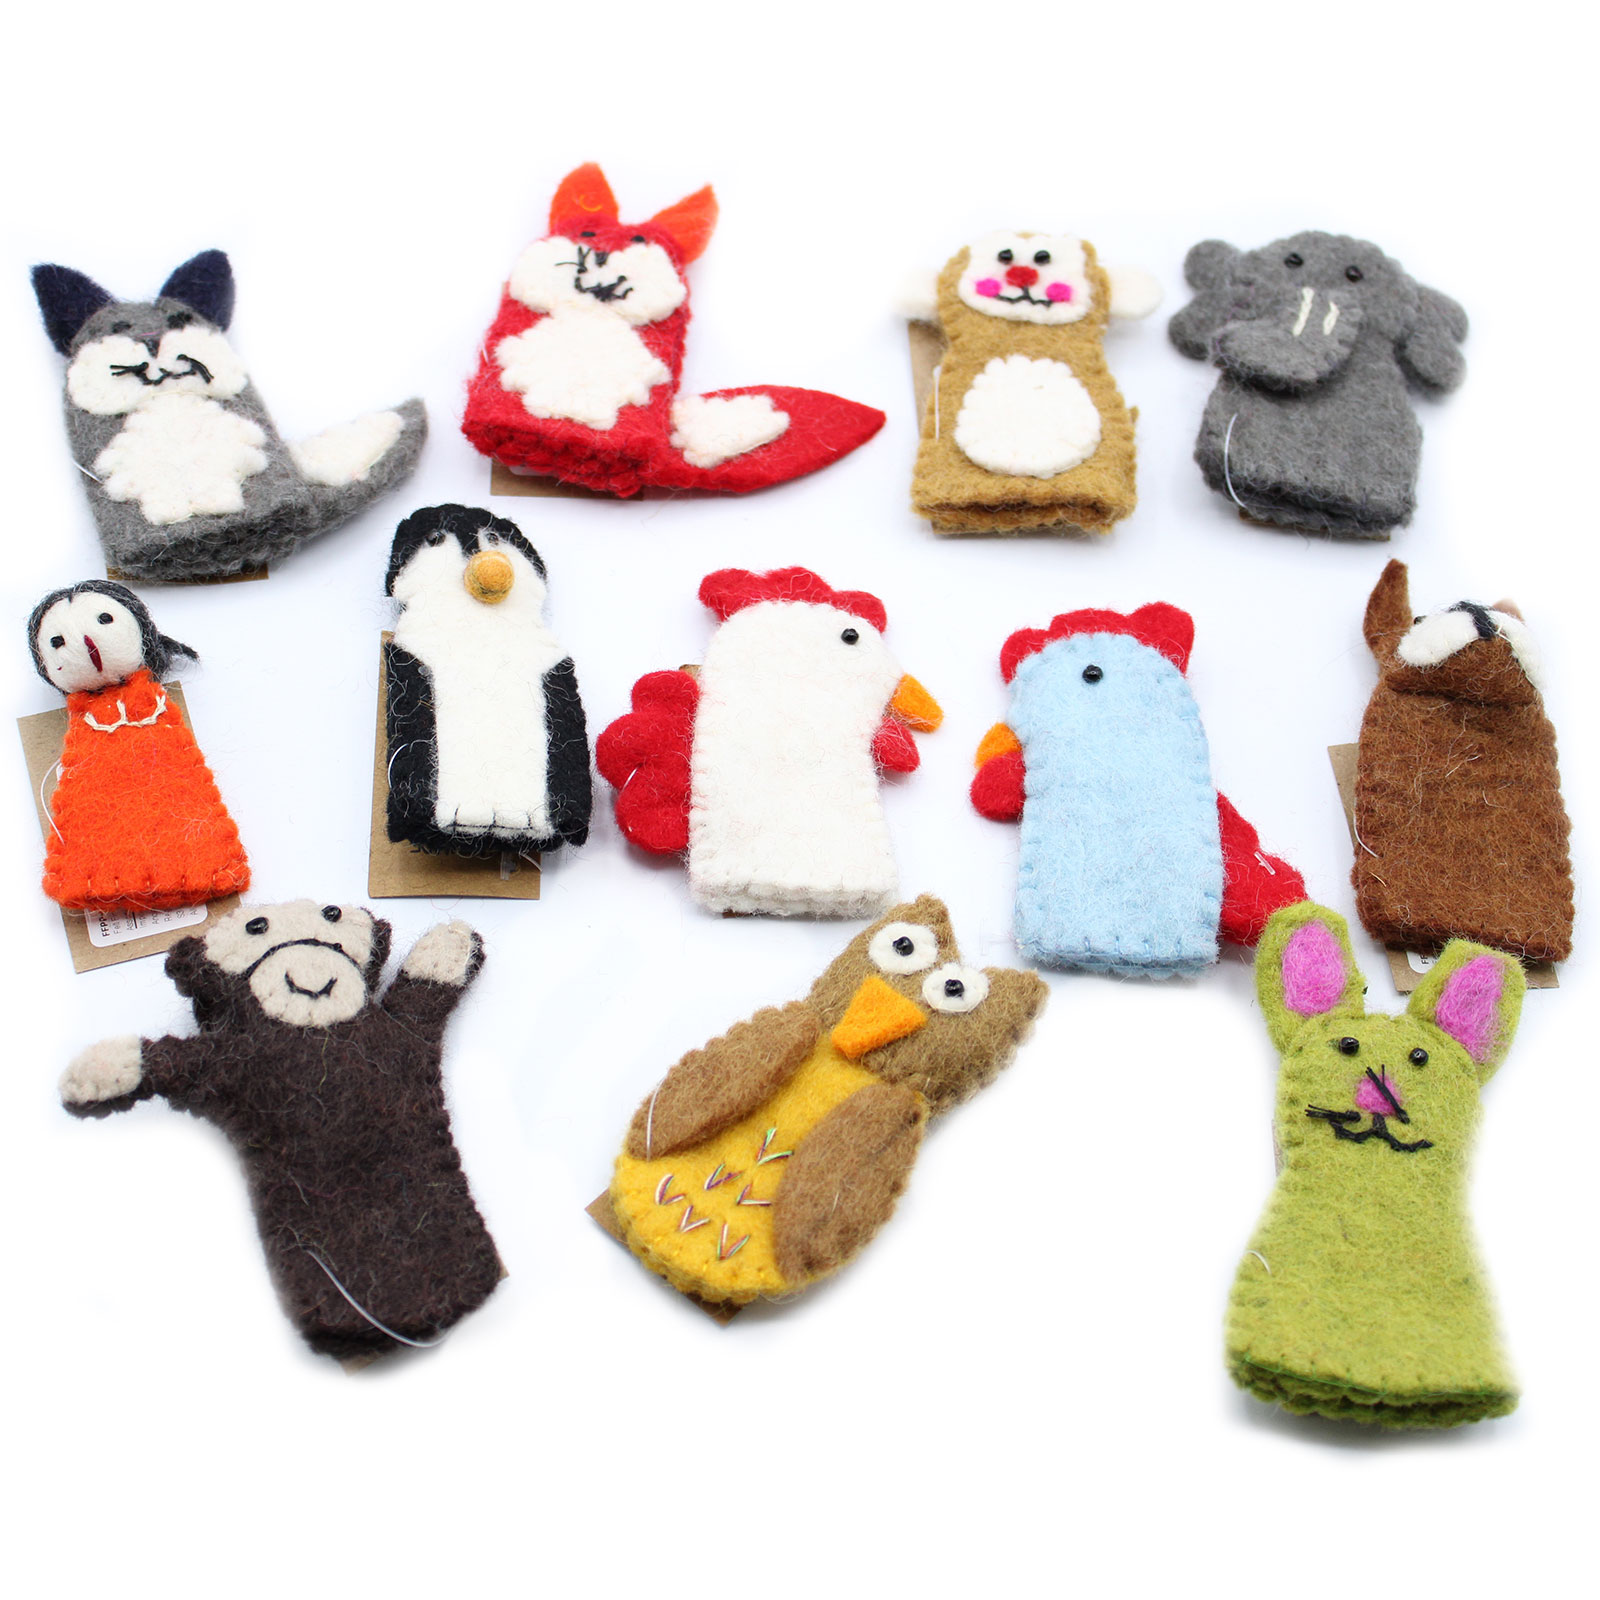 Made in Nepal Ancient Wisdom Felt Pouches with Finger Puppets Various Designs 